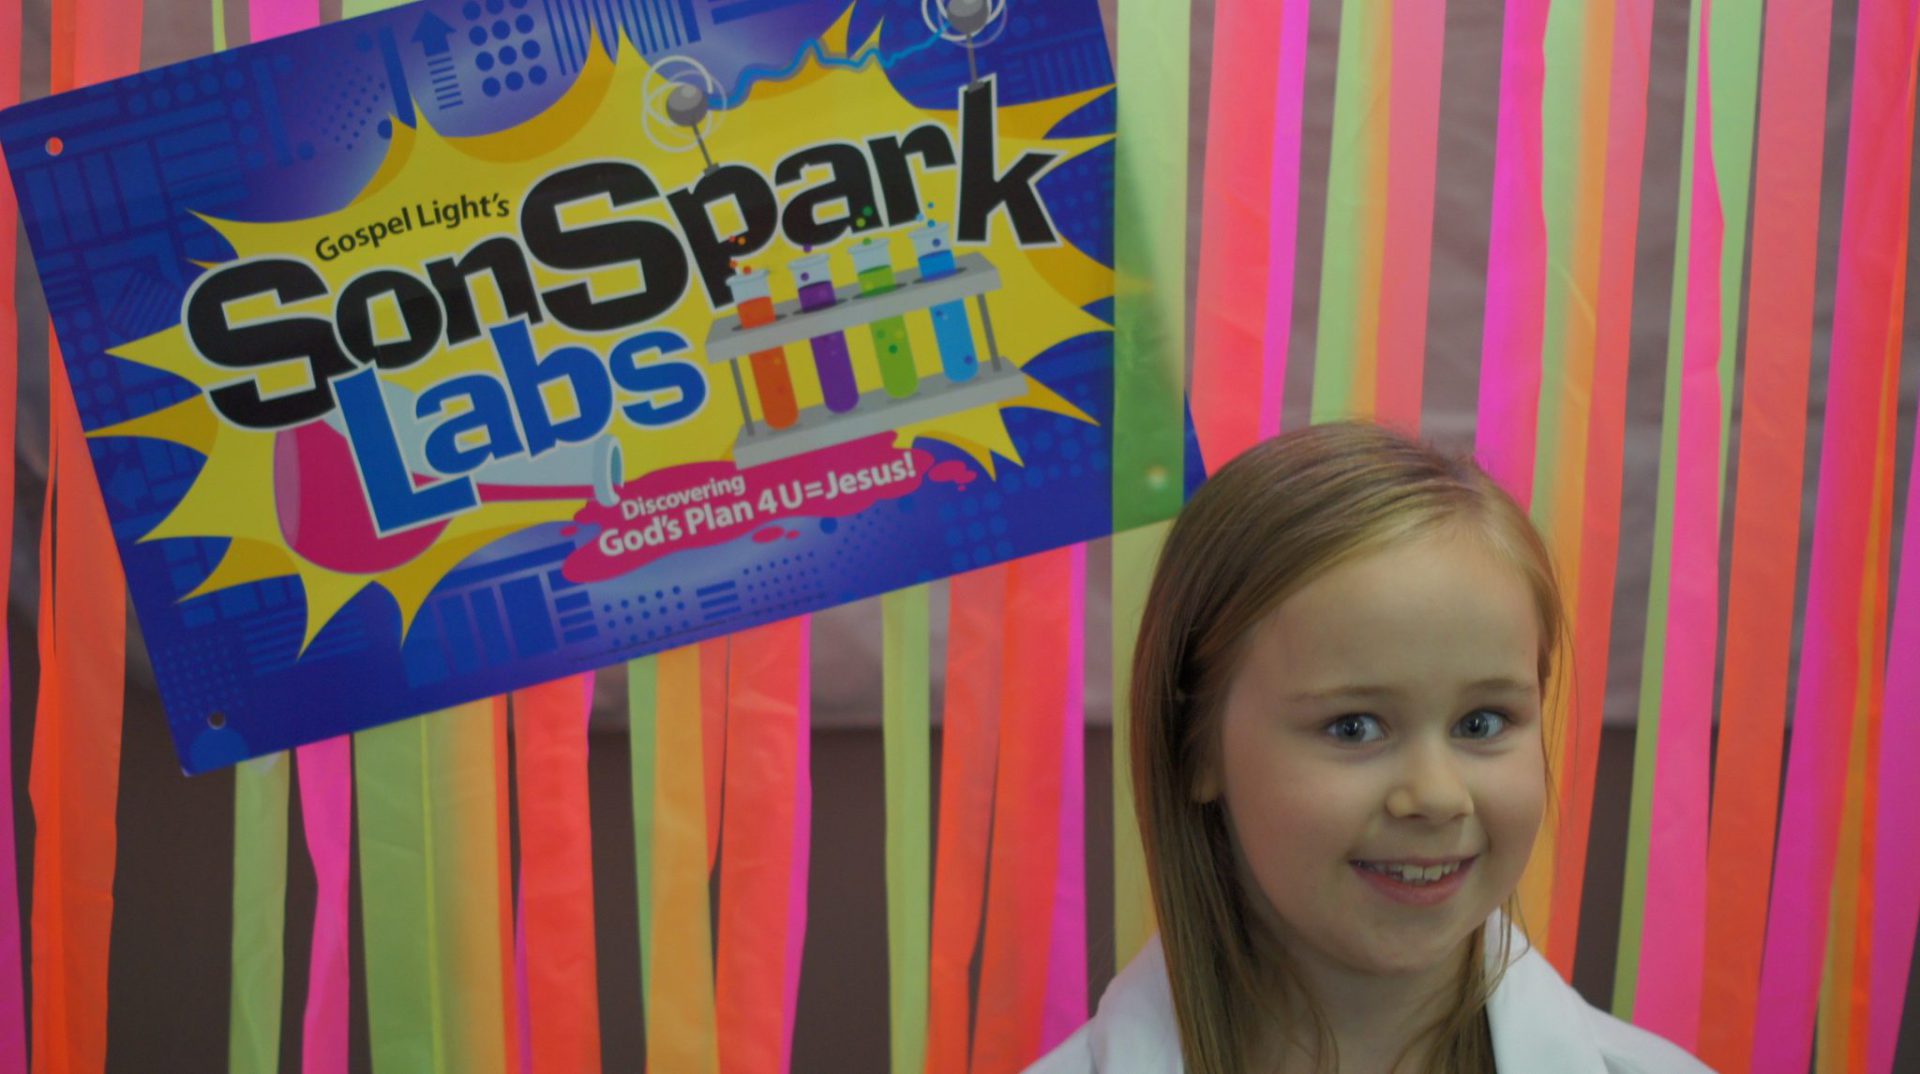 SonSpark Labs VBS Decorating Poster Pack Elementary Science